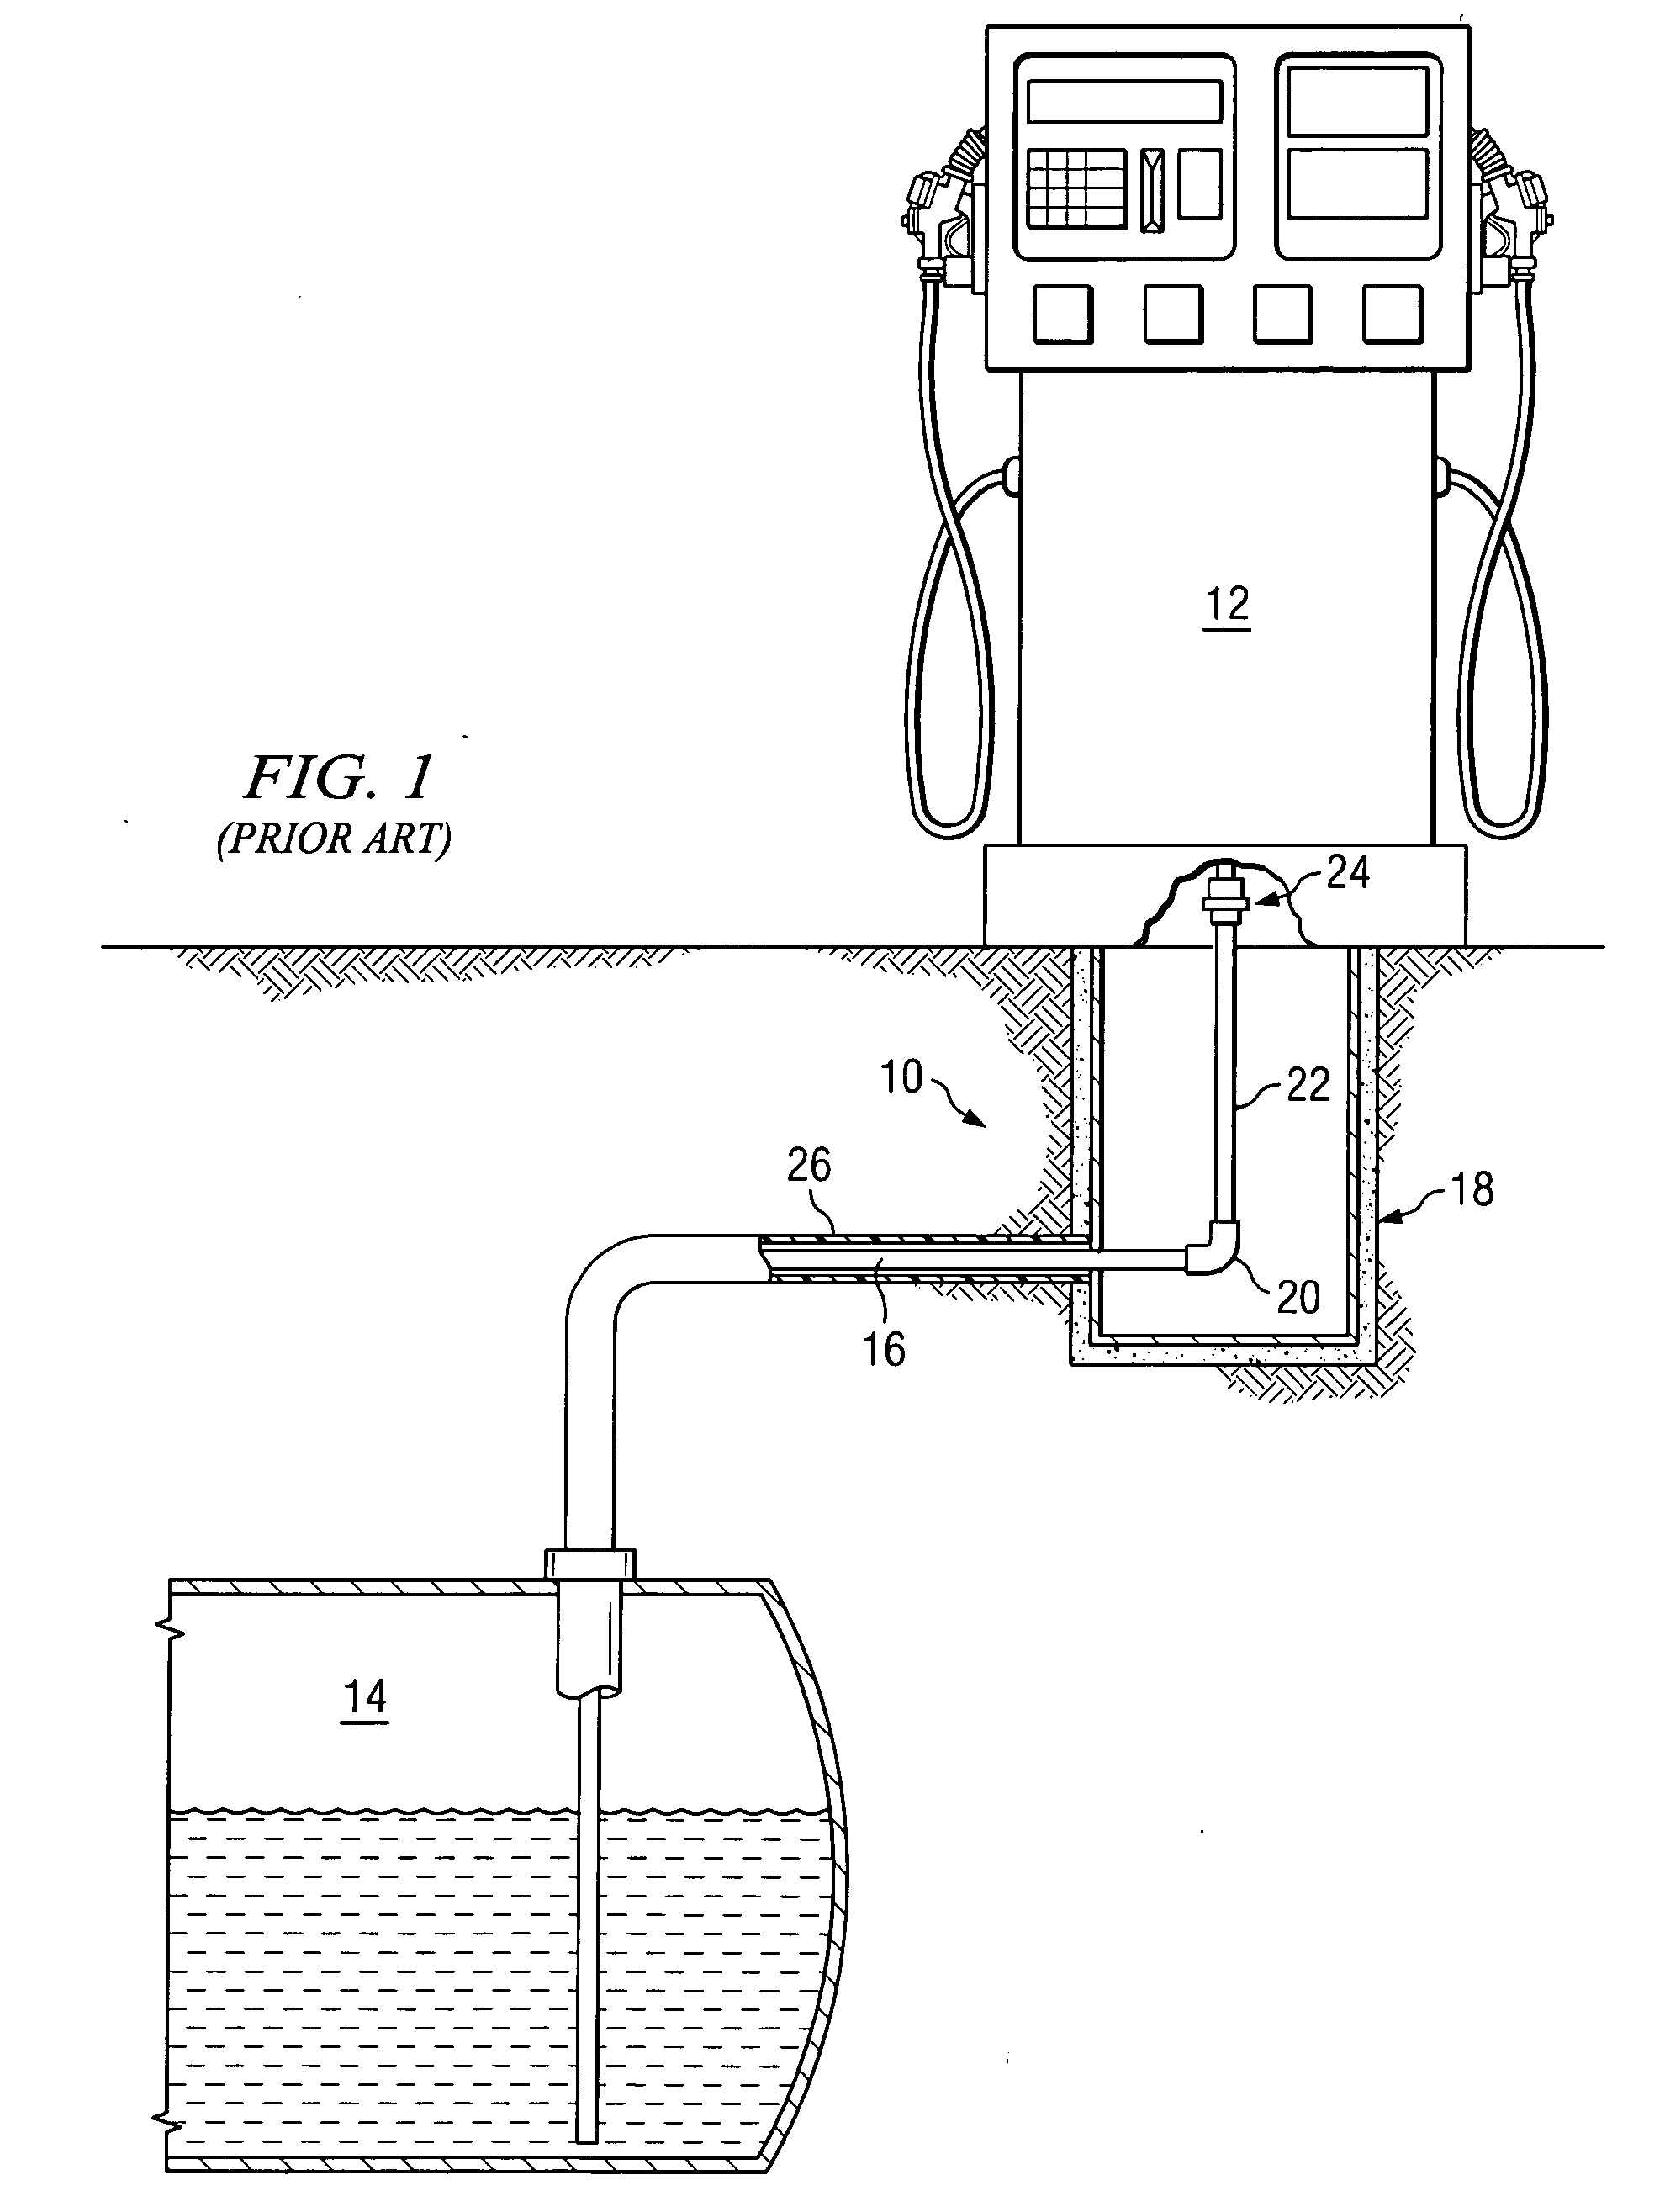 Double-walled flexible dispenser sump connection system